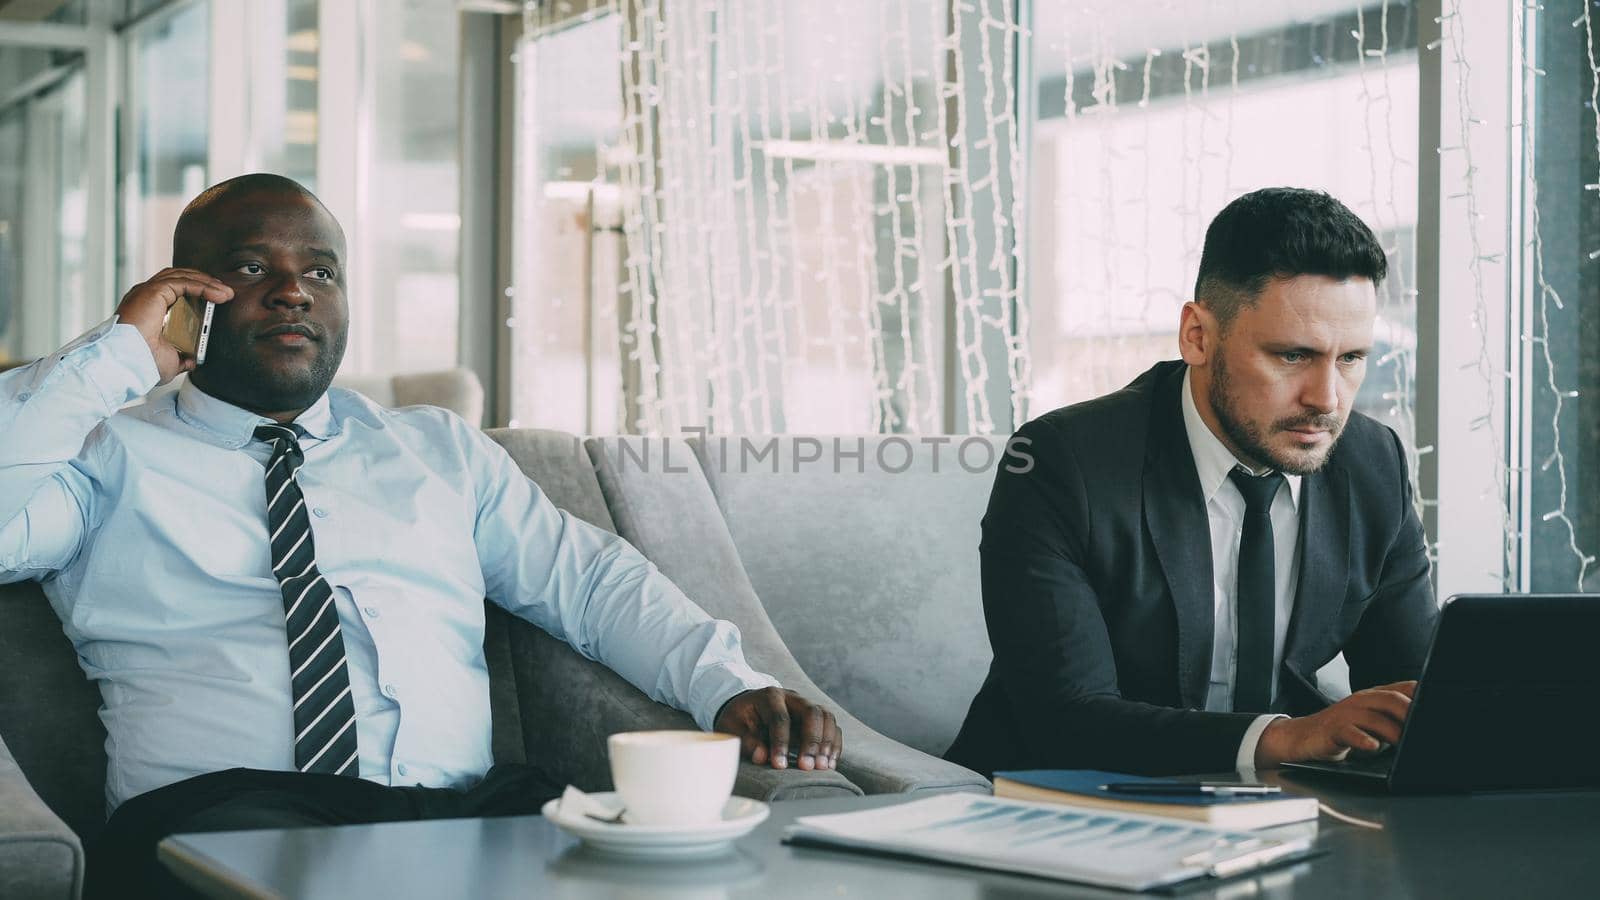 Caucasian businessman in formal clothes printing business information on his laptop and his African American colleague talking on smartphone in cafe. by silverkblack